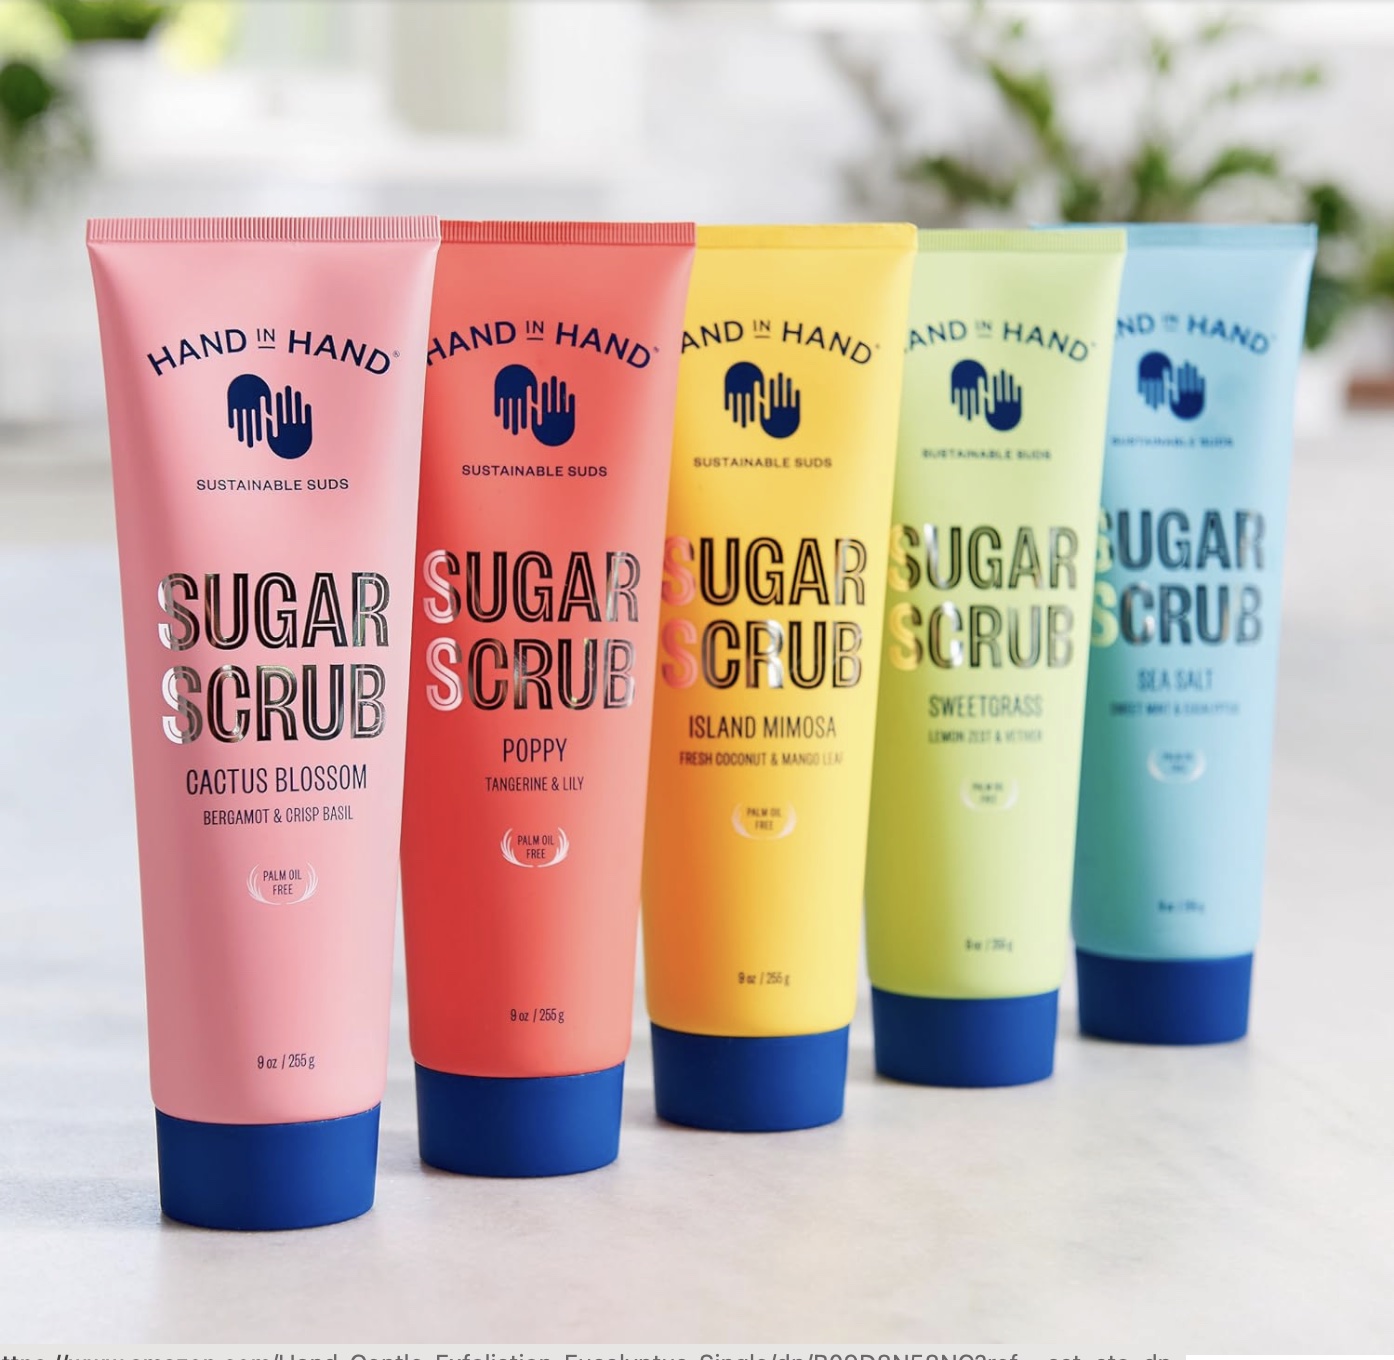 Best gifts under !5: Hand-in-Hand's sustainable sugar body scrub that gives back